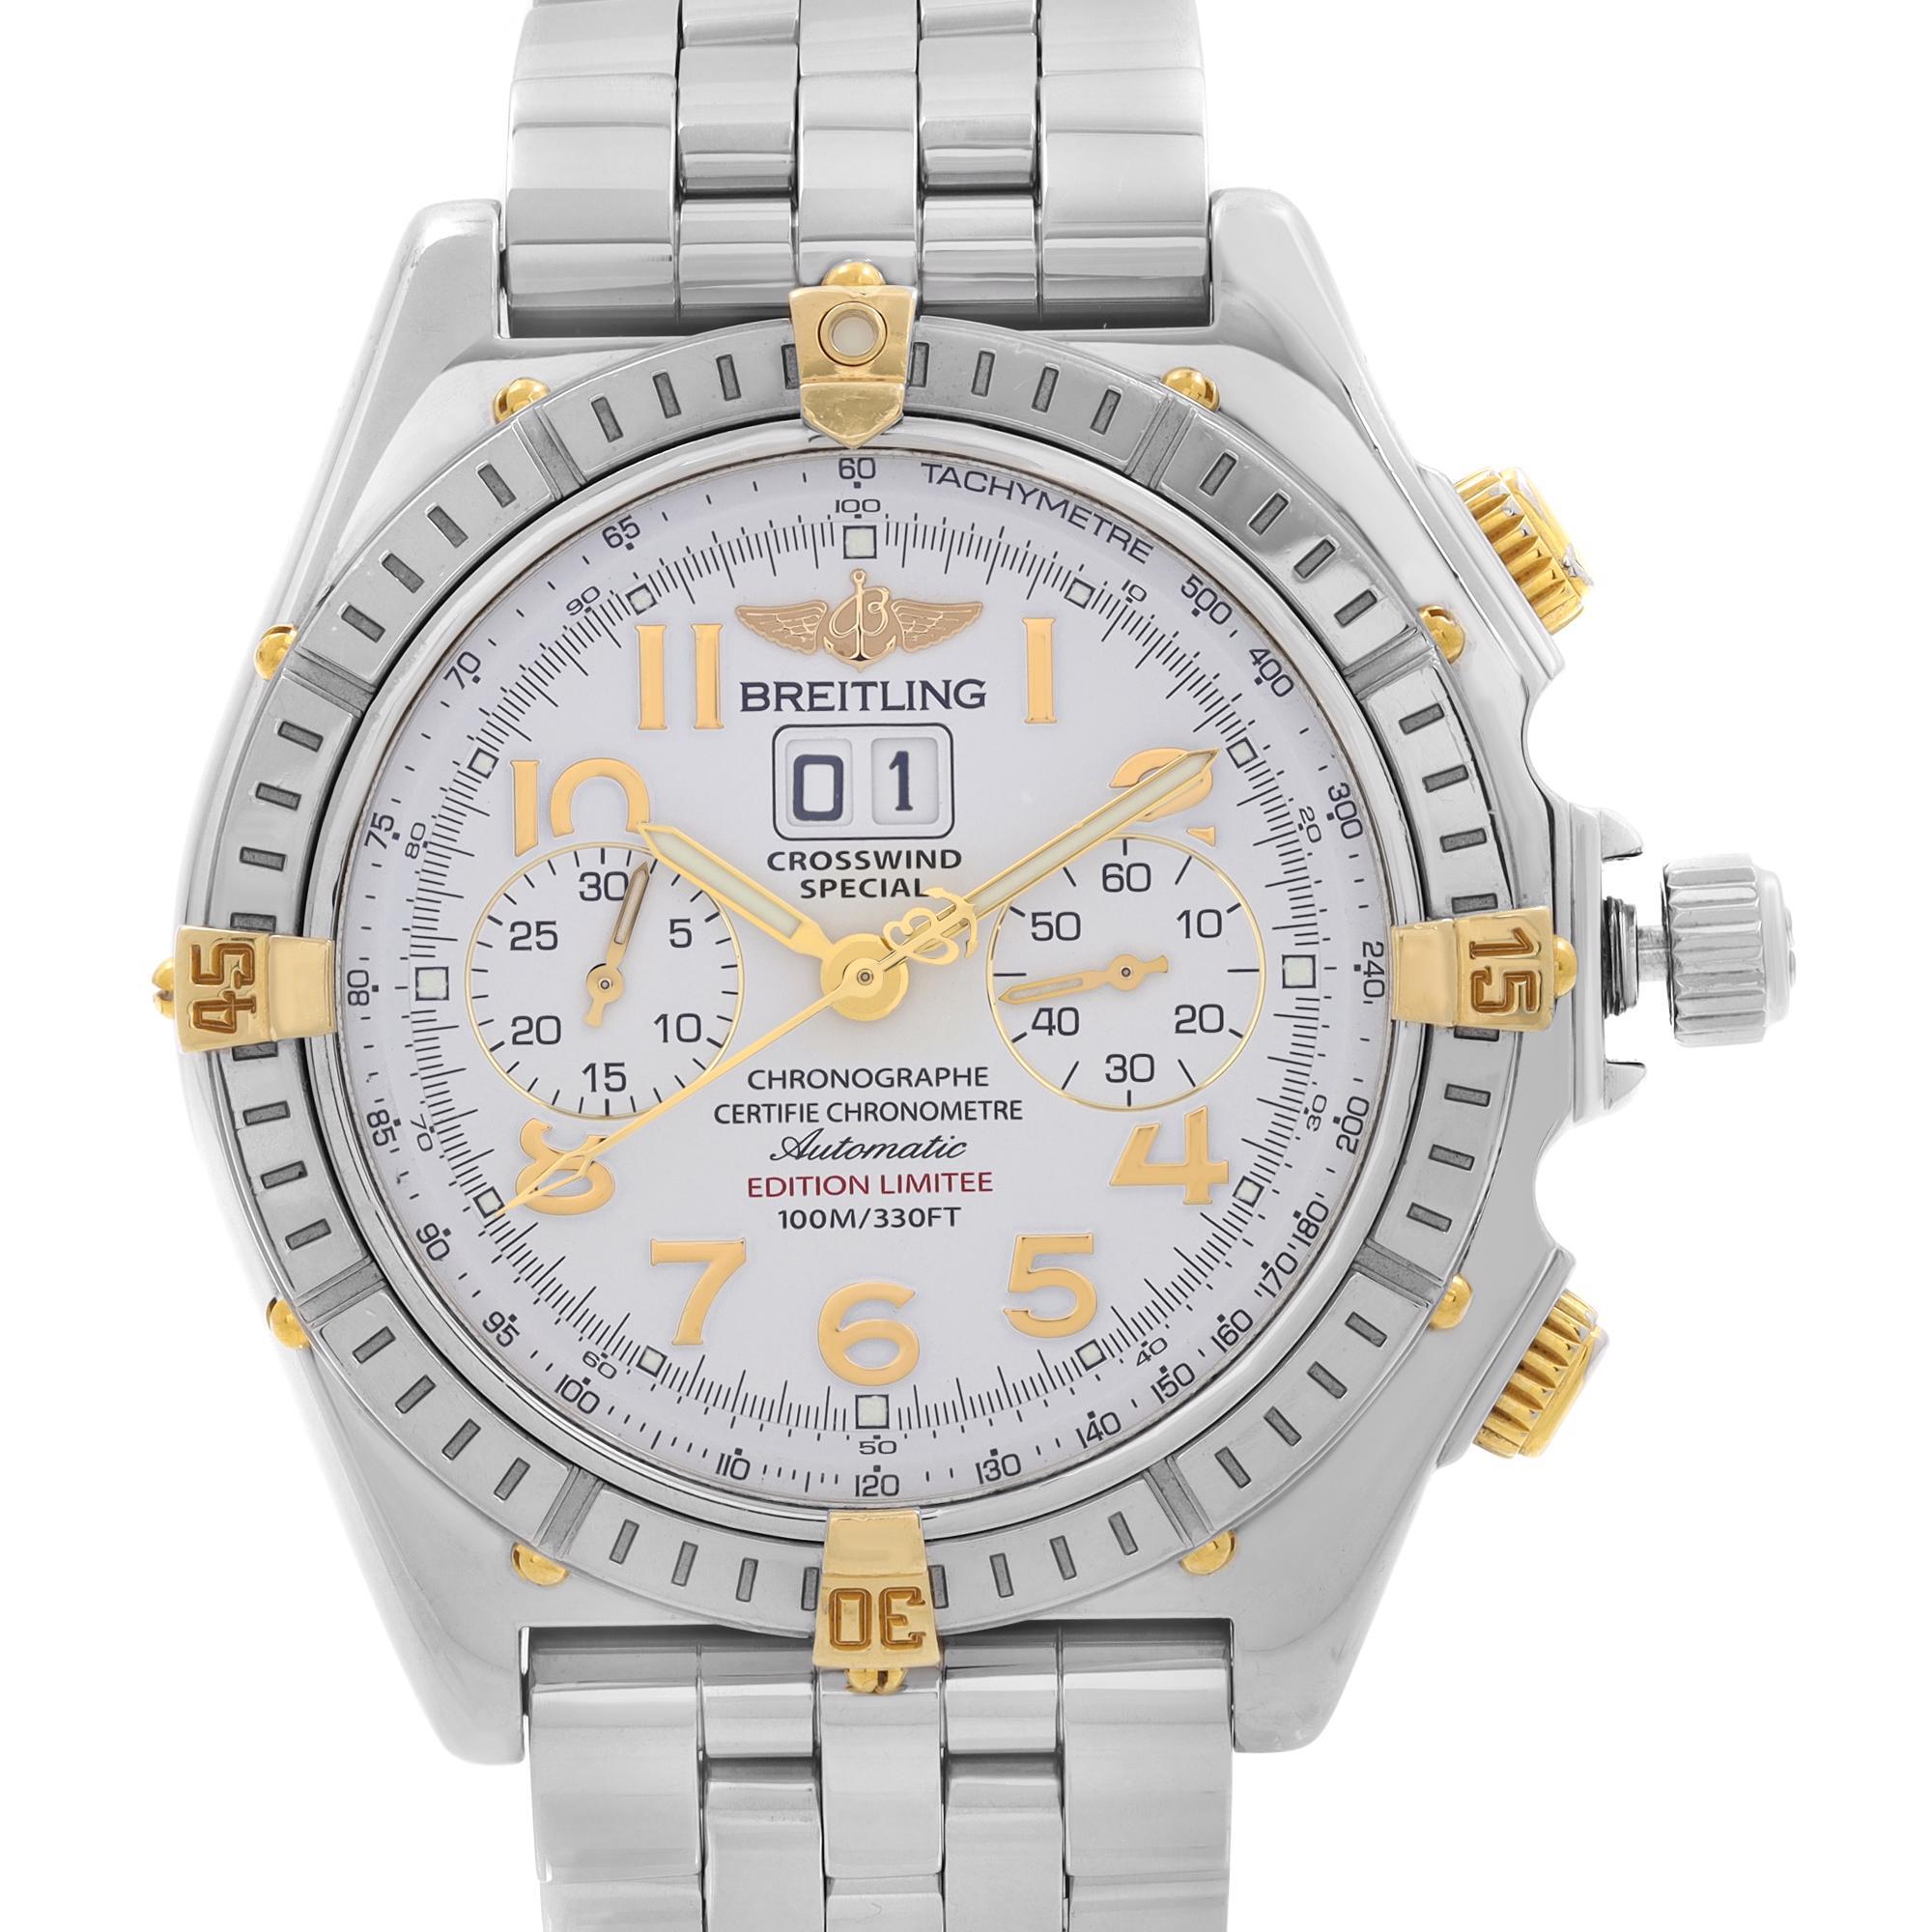 Pre-owned Limited Edition Breitling Crosswind 44mm Steel Chronograph White Dial Automatic Mens Watch B44356. The bracelet is Breitling original 375A but doesn't come with this particular model. This Beautiful Timepiece is Powered by an Automatic